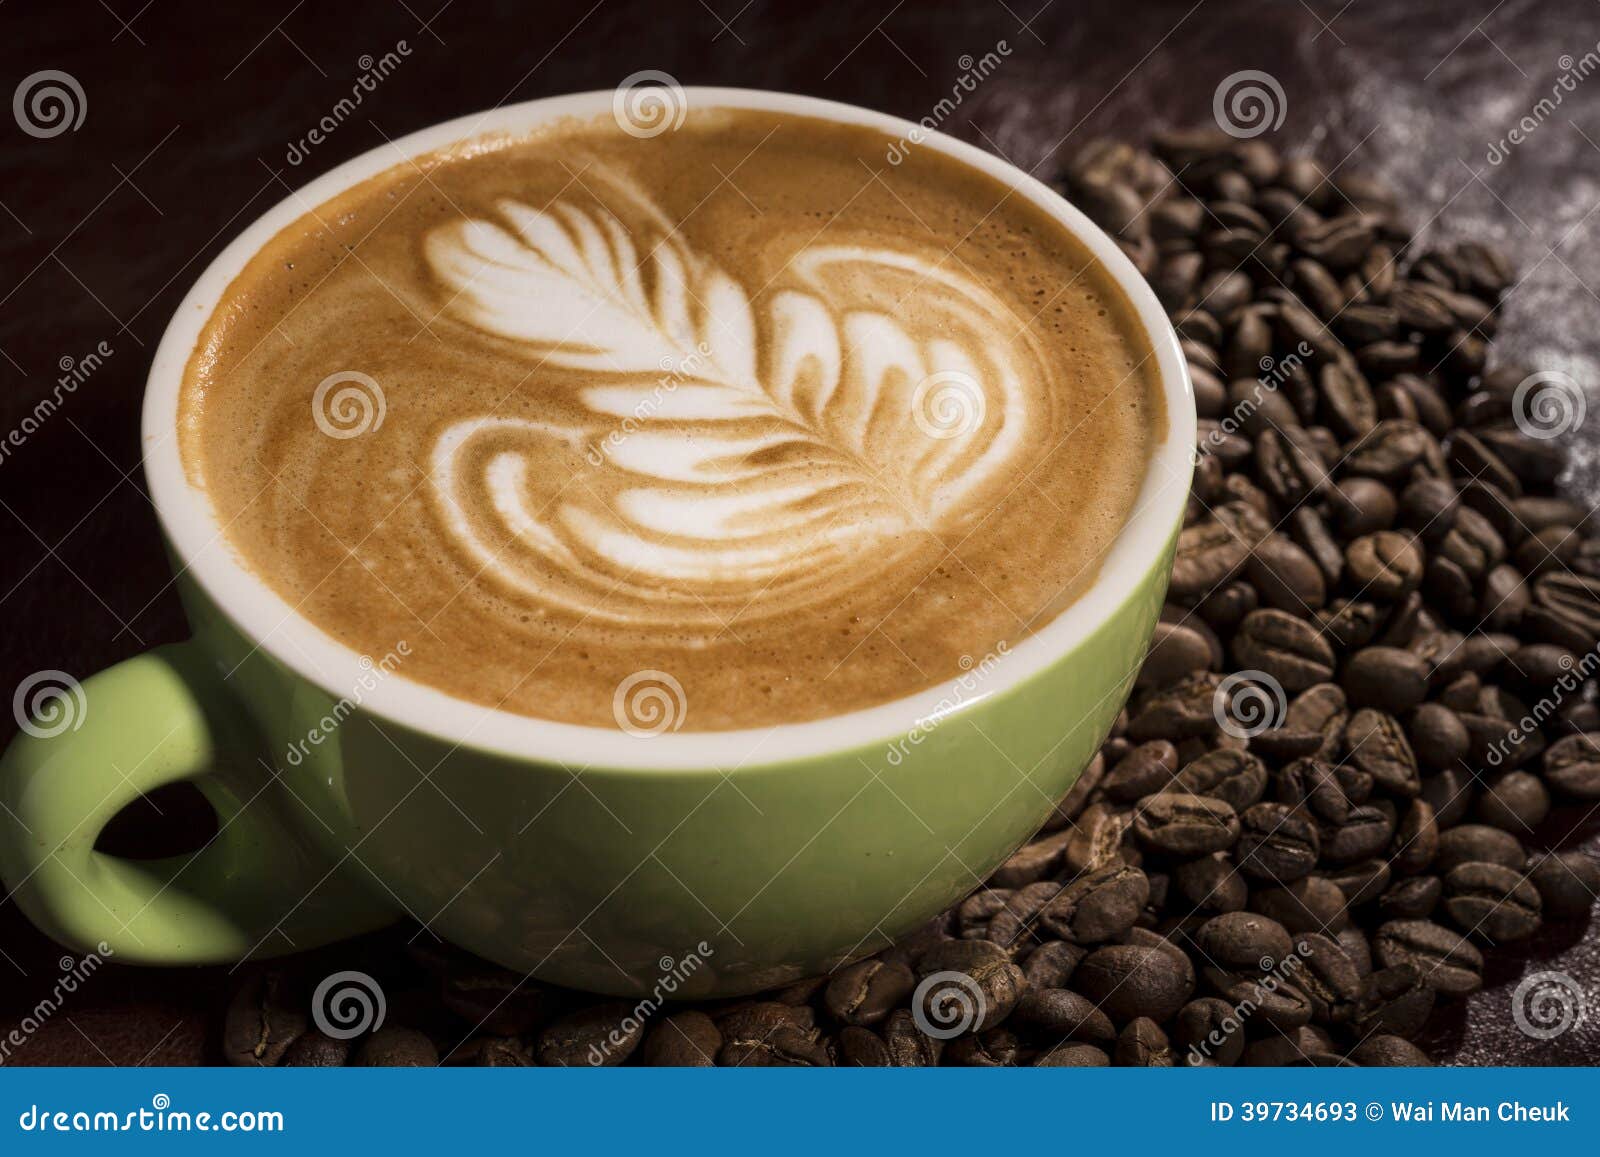 a cup of coffee with latte art